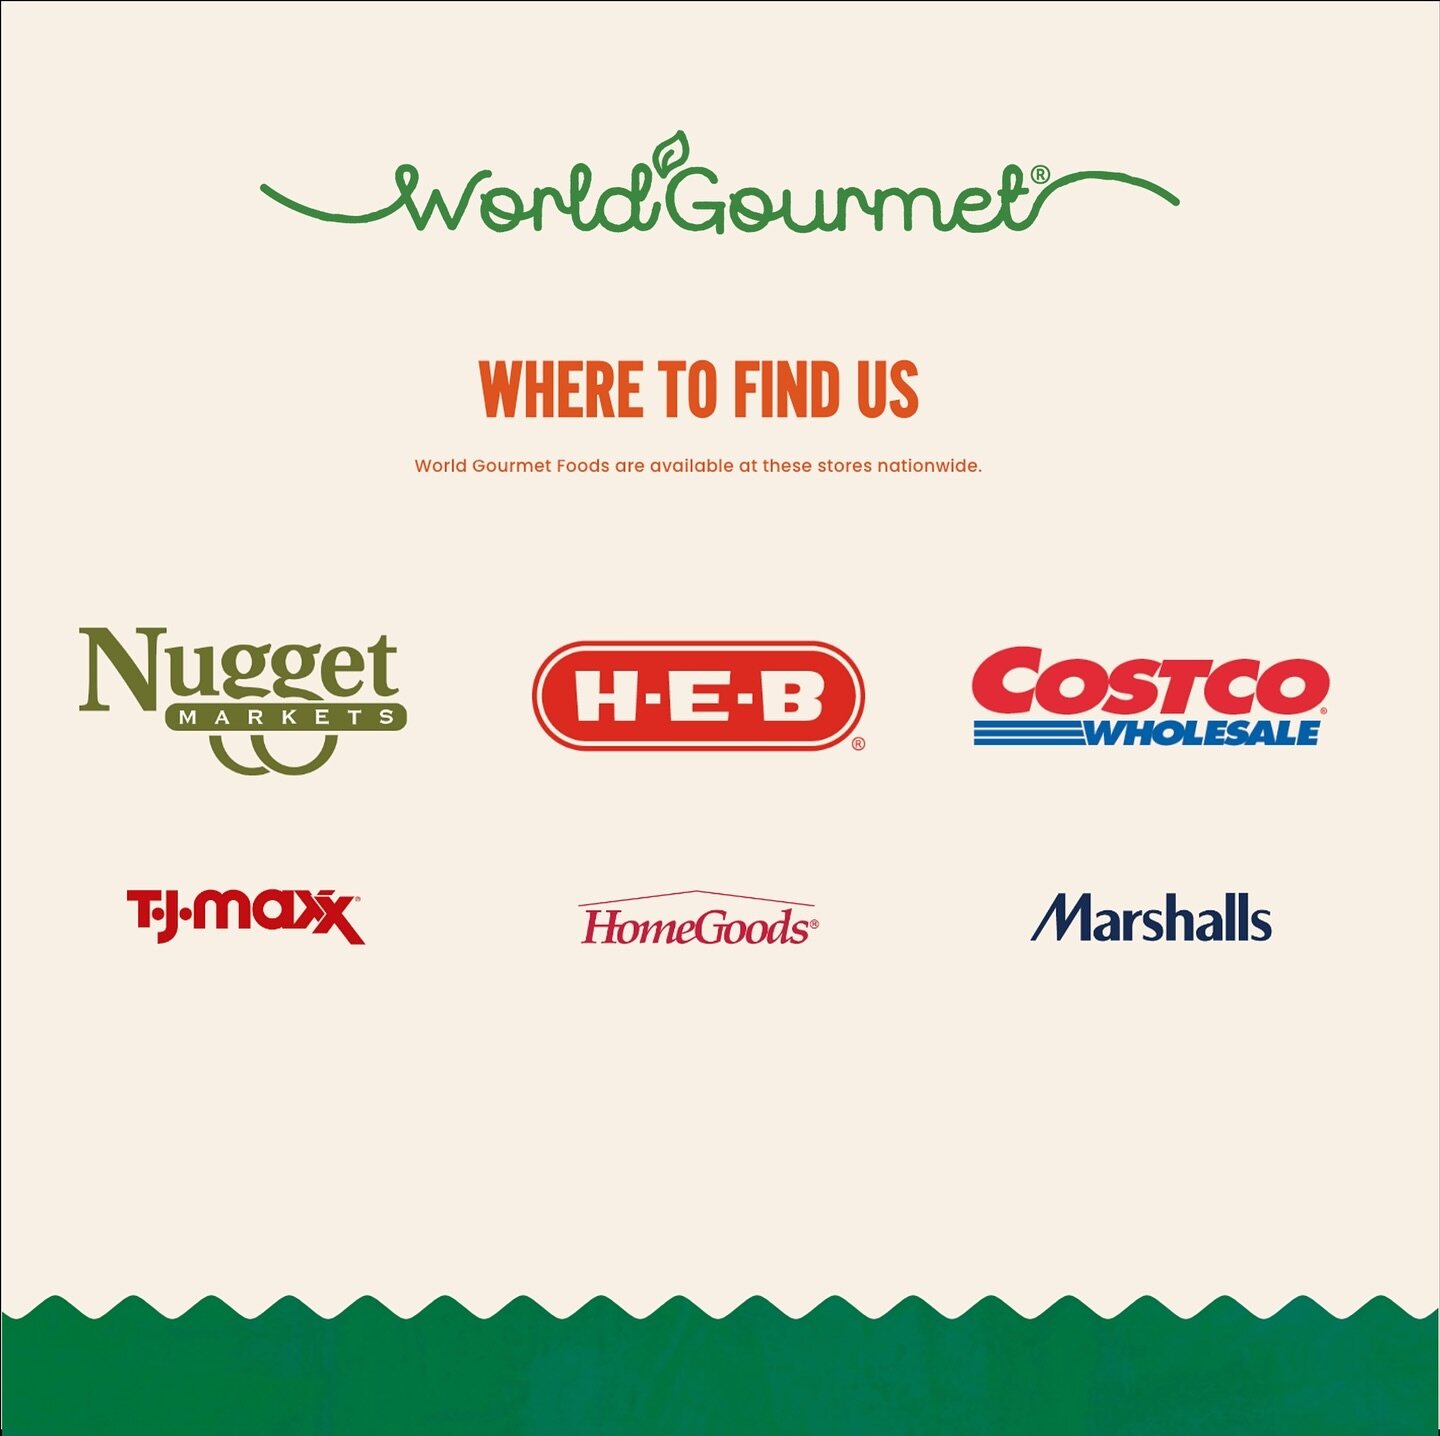 Curious where to find us? Look no further and enjoy the diverse selection of World Gourmet foods at a retailer or club store near you. #delicious